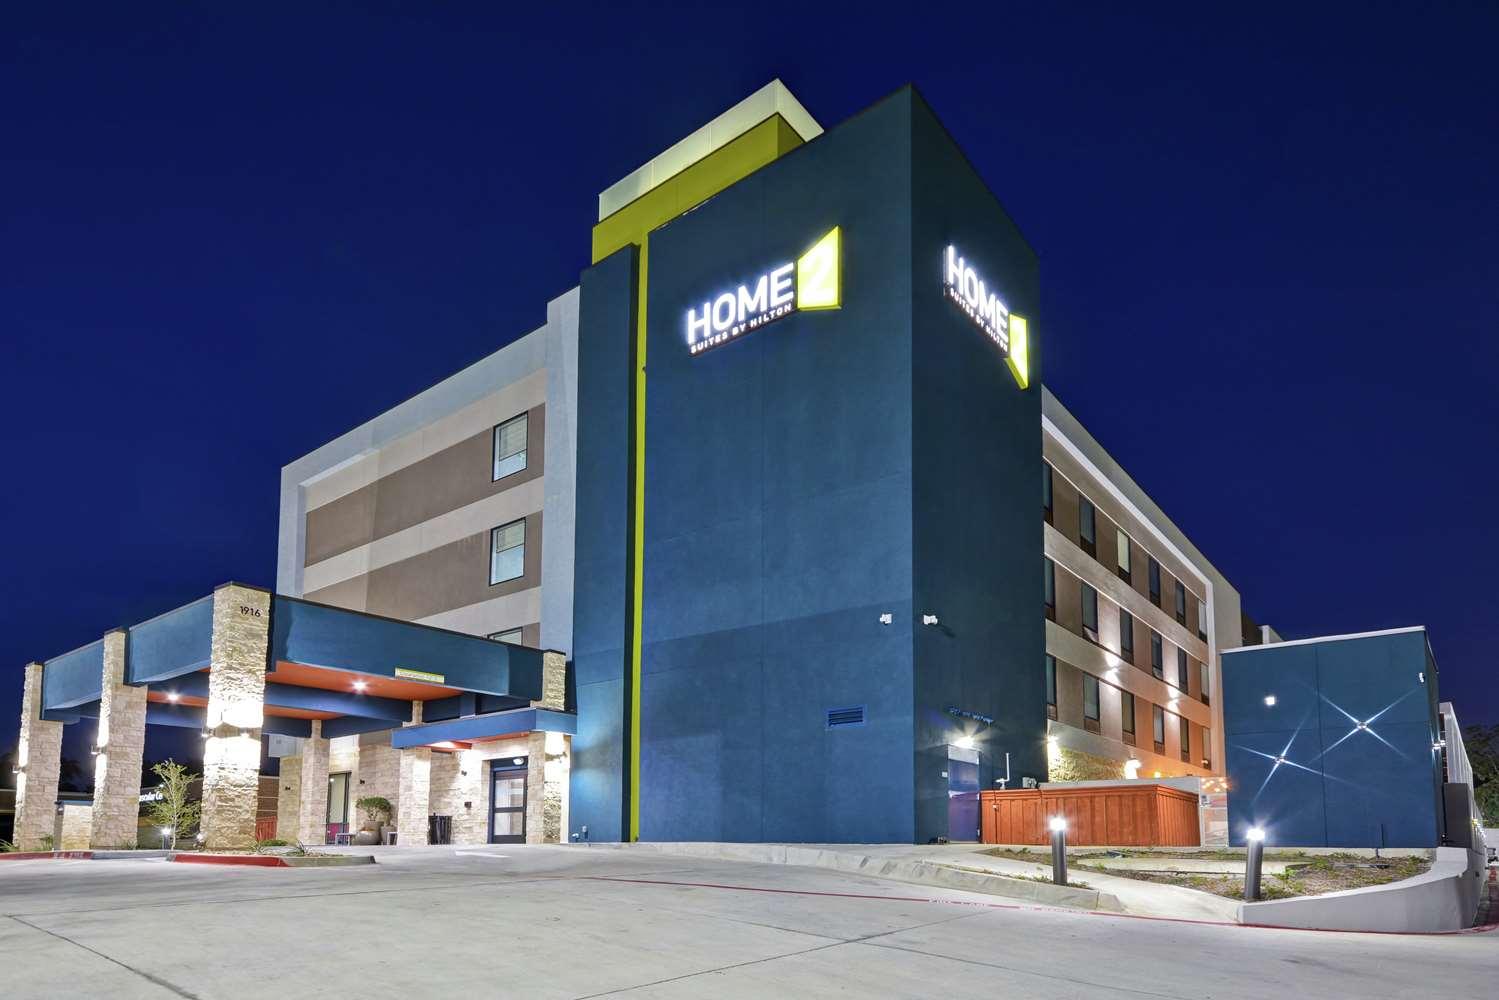 Home2 Suites by Hilton Bedford DFW West in Bedford, TX